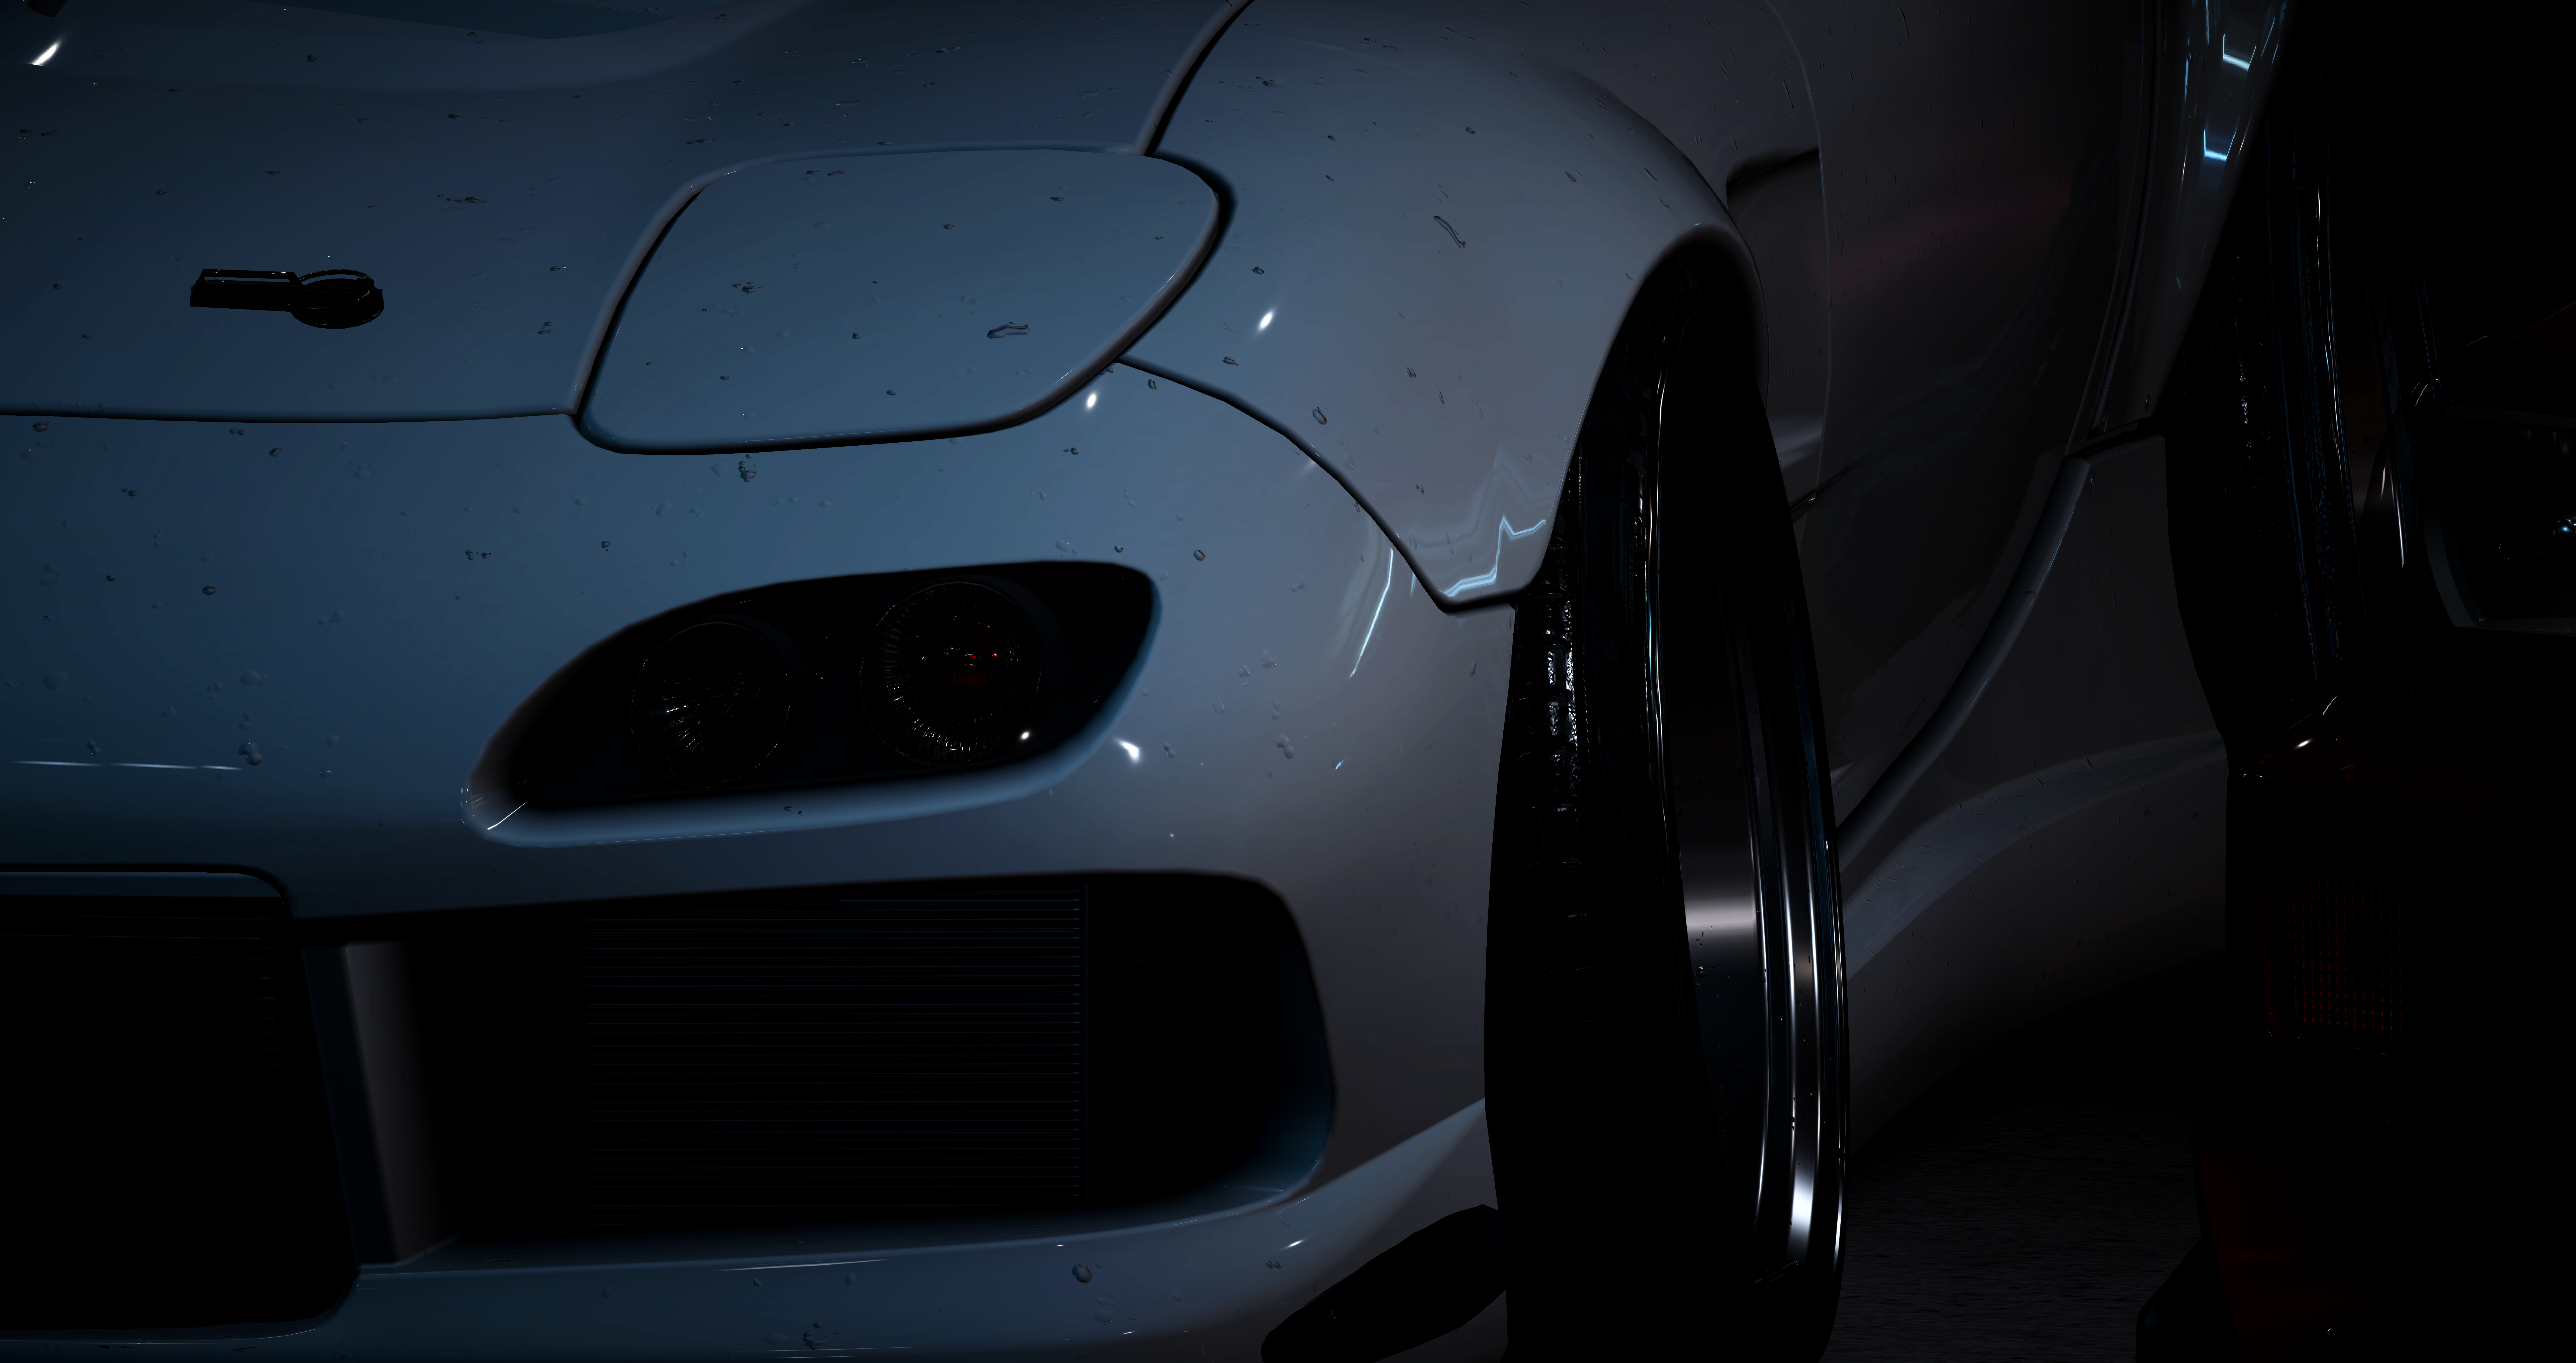 Rx7 Mazda RX 7 Mazda White Car Need For Speed NFS 2015 Vehicle Video Games 9556x5056